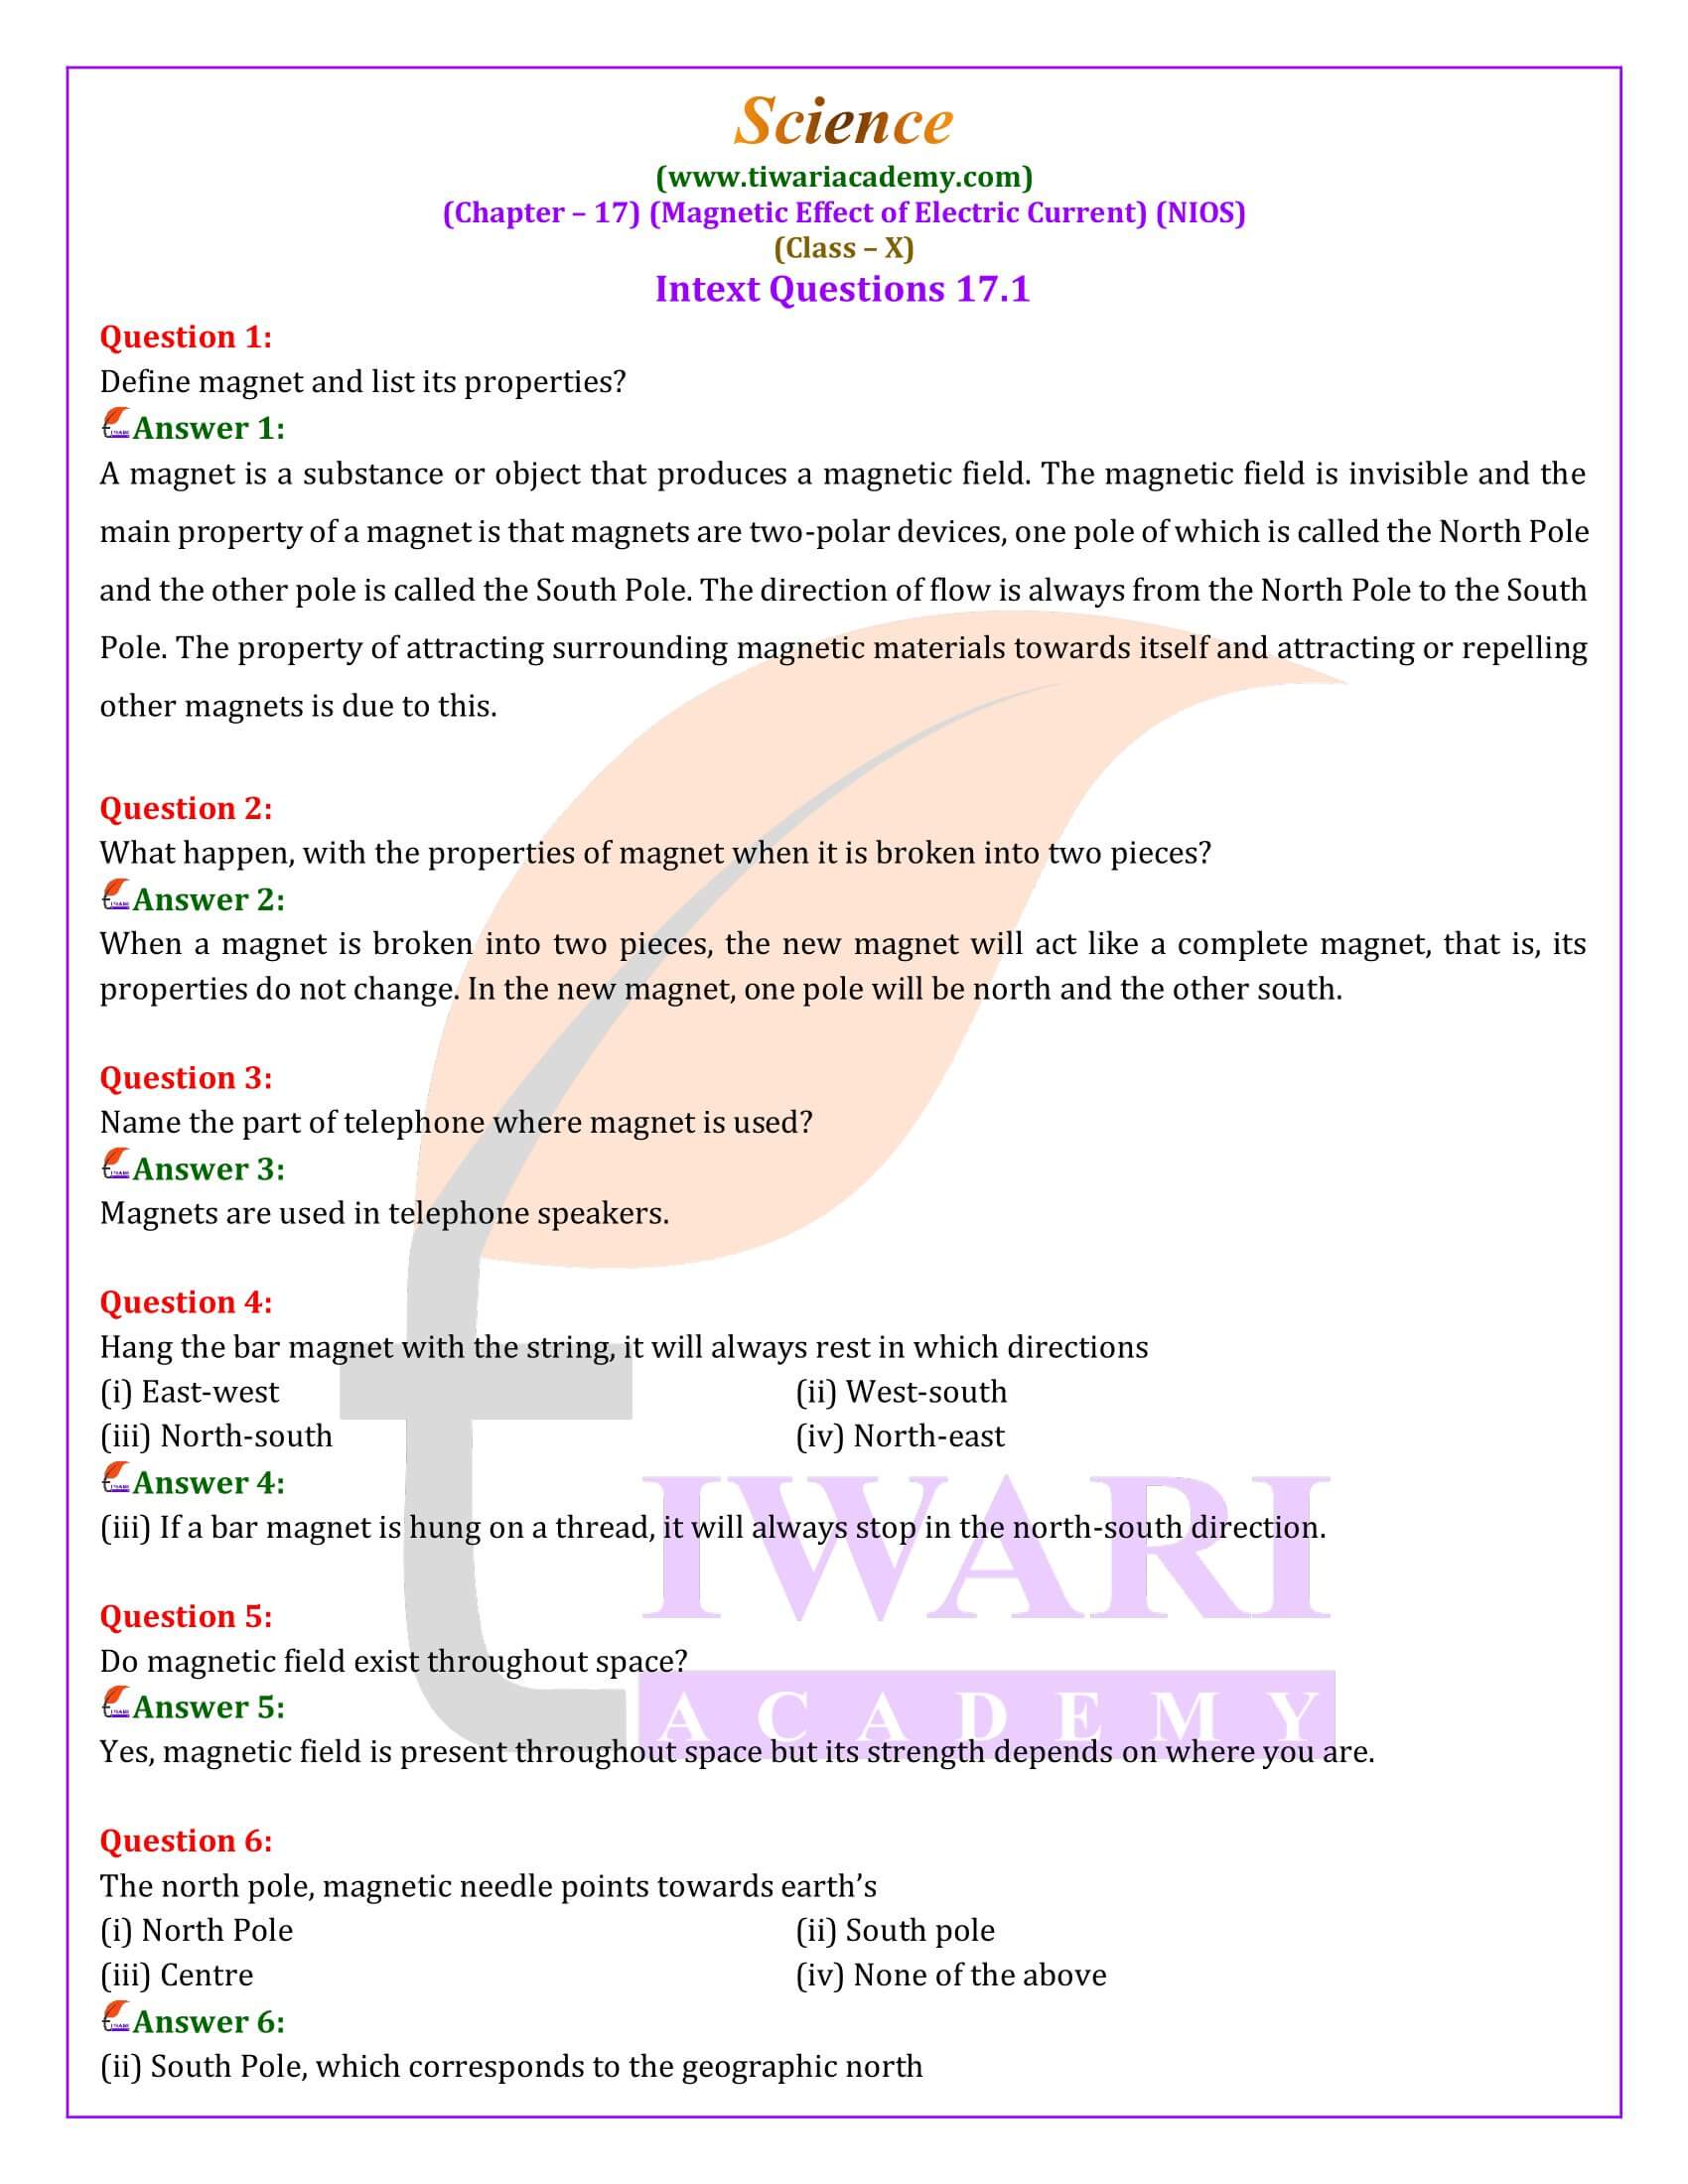 NIOS Class 10 Science Chapter 17 Magnetic Effect of Electric Current Answers